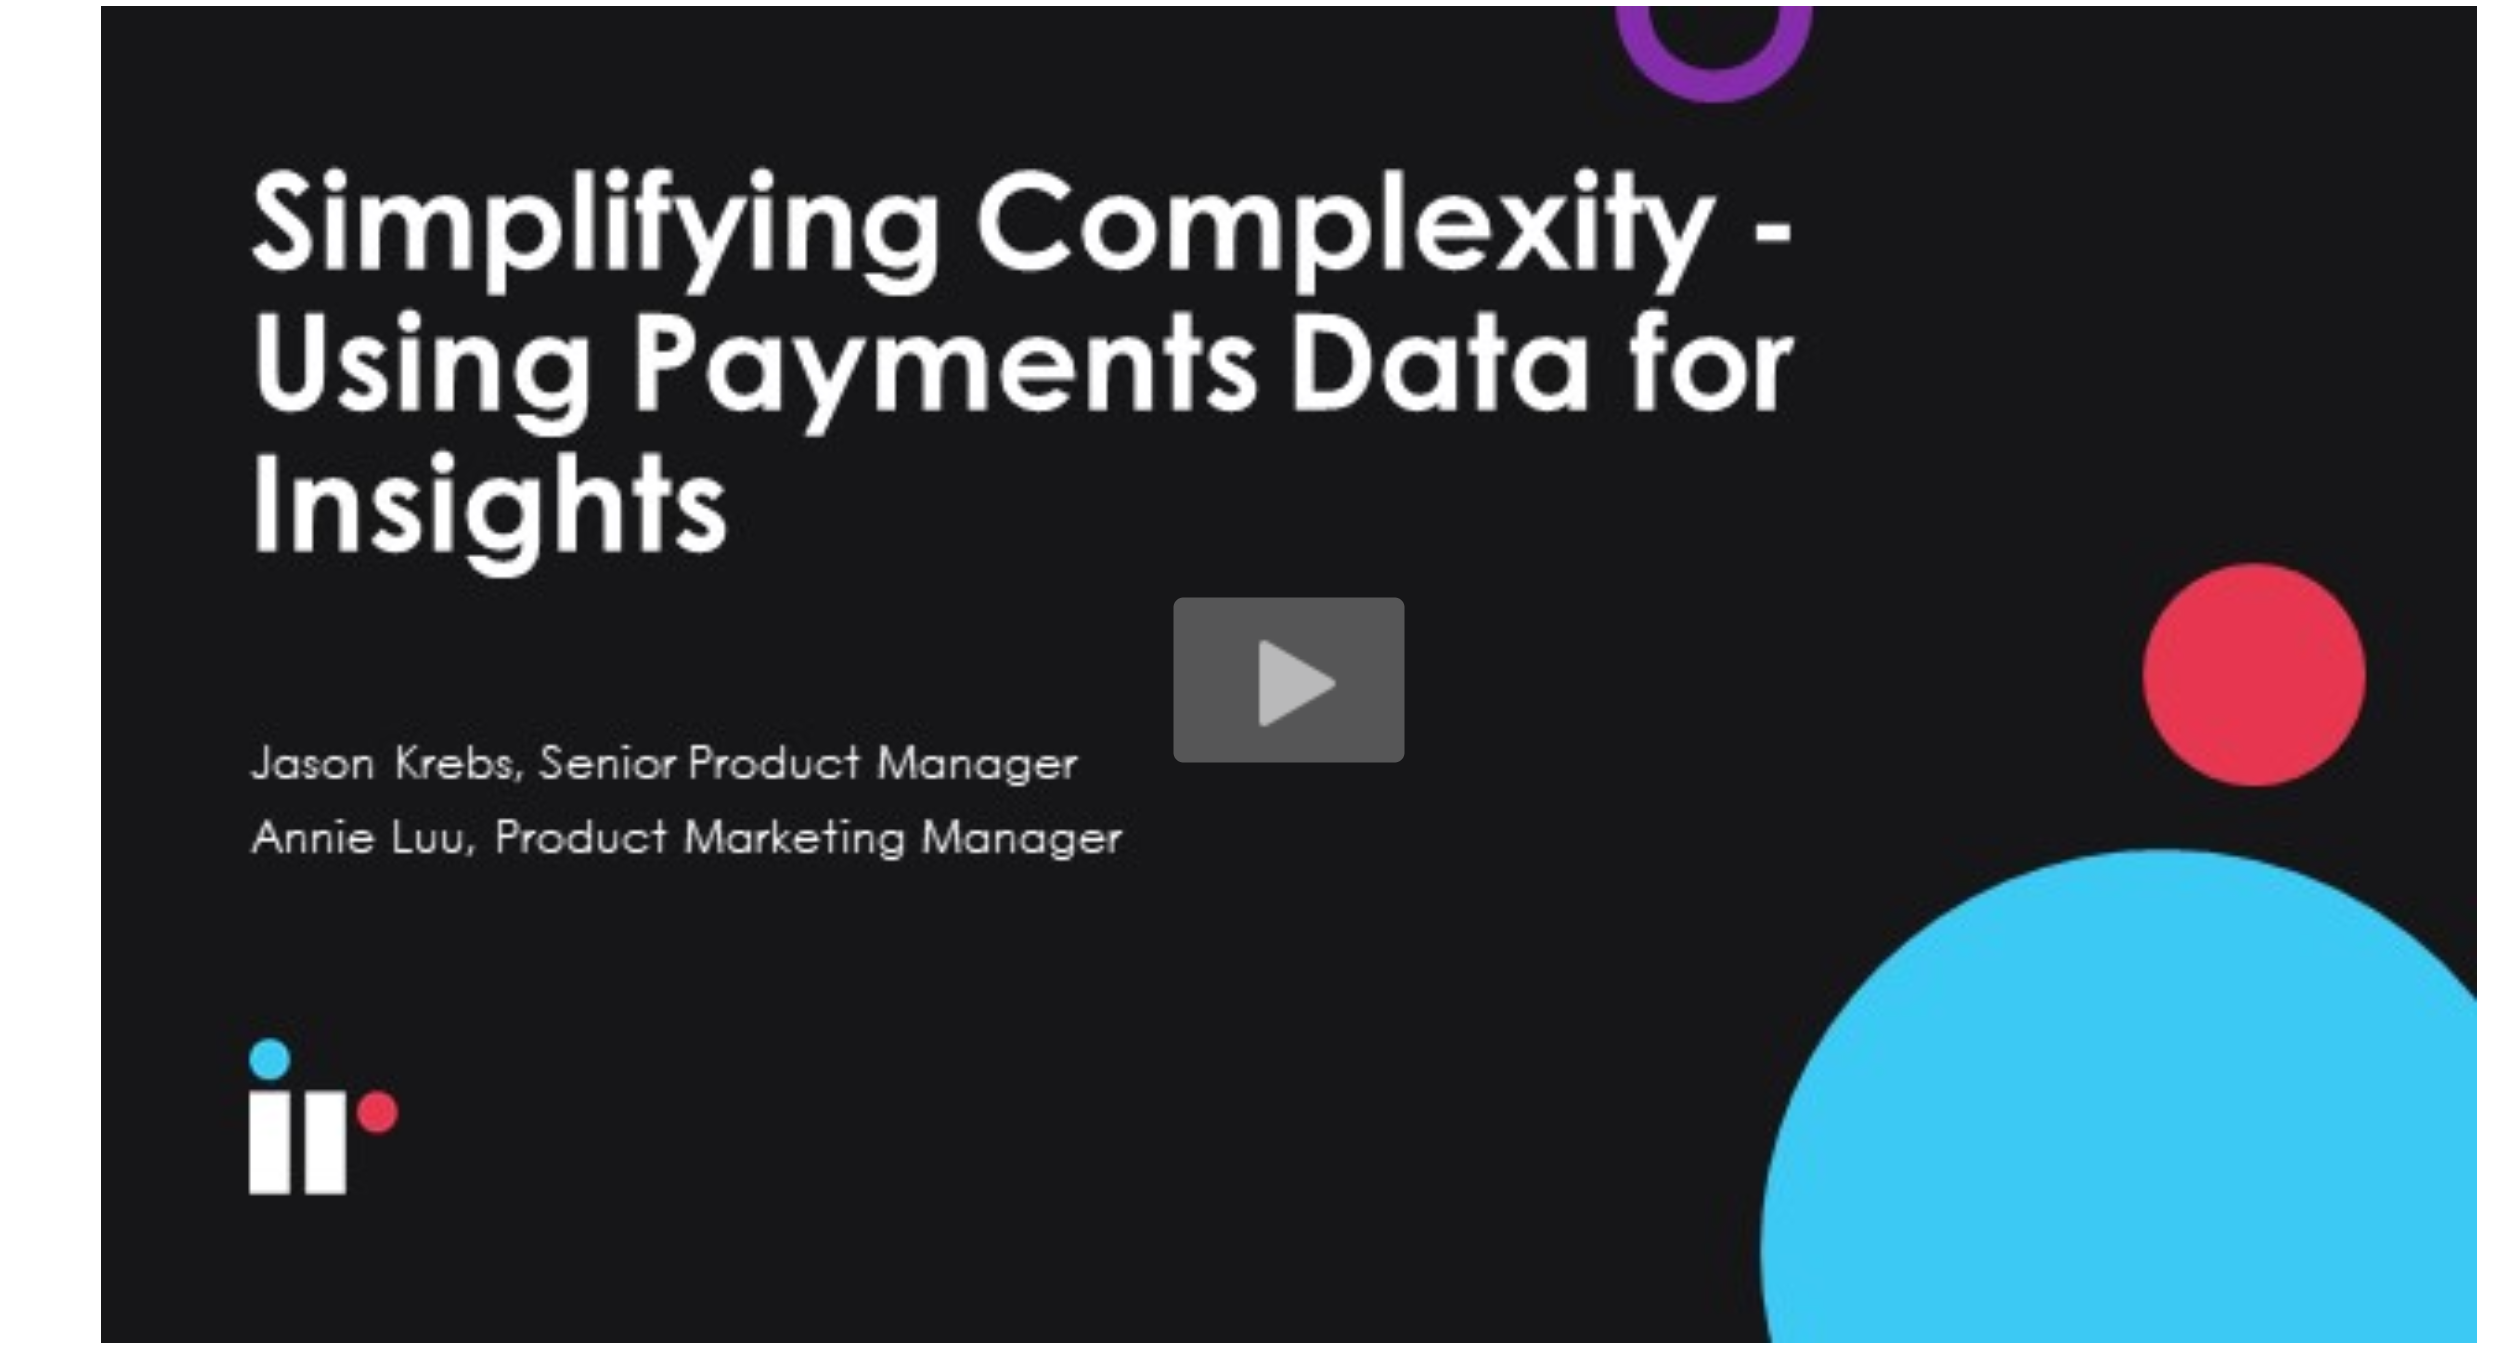 Simplifying Complexity - Using Payments Data for Insights